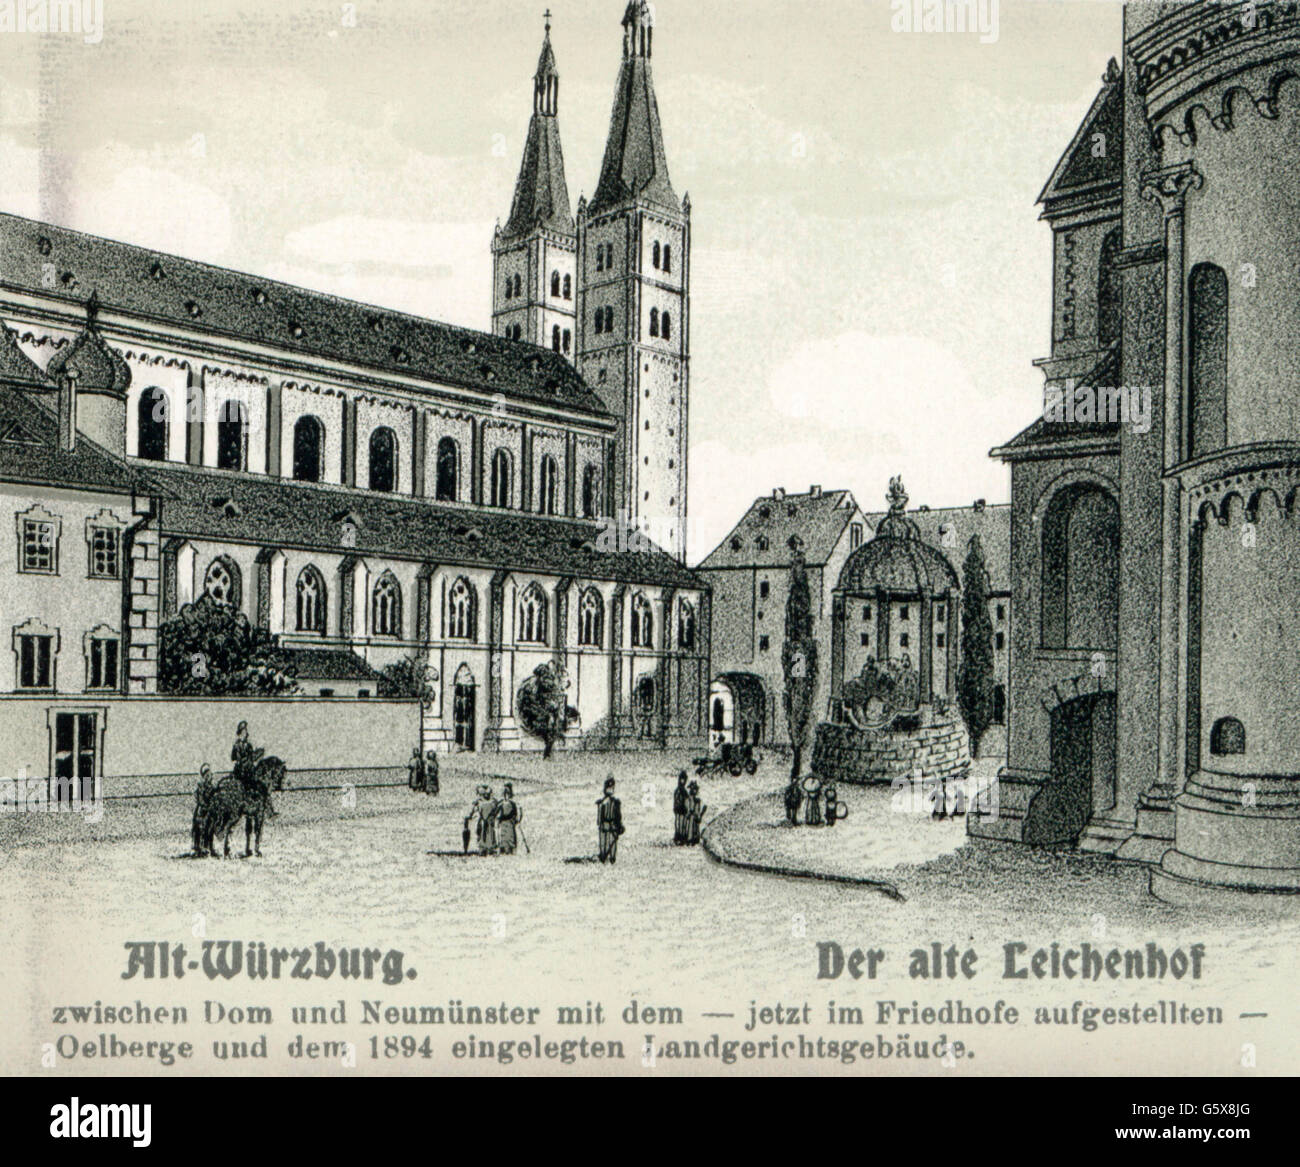 geography / travel, Germany, Wuerzburg, squares, the old Leichenhof between Cathedral and Neumuenster, drawing, postcard, publisher Gustav Erdmann, late 19th century, Mount of Olives, Mount Olivet, church, churches, Würzburg cathedral, series Alt-Würzburg, Lower Franconia, Kingdom of Bavaria, German Empire, Imperial Era, Central Europe, people, squares, square, postcard, postal card, postcards, postal cards, publisher, publishers, historic, historical, Wuerzburg, Würzburg, Wurzburg, Neumuenster, Neumünster, Neumunster, Additional-Rights-Clearences-Not Available Stock Photo